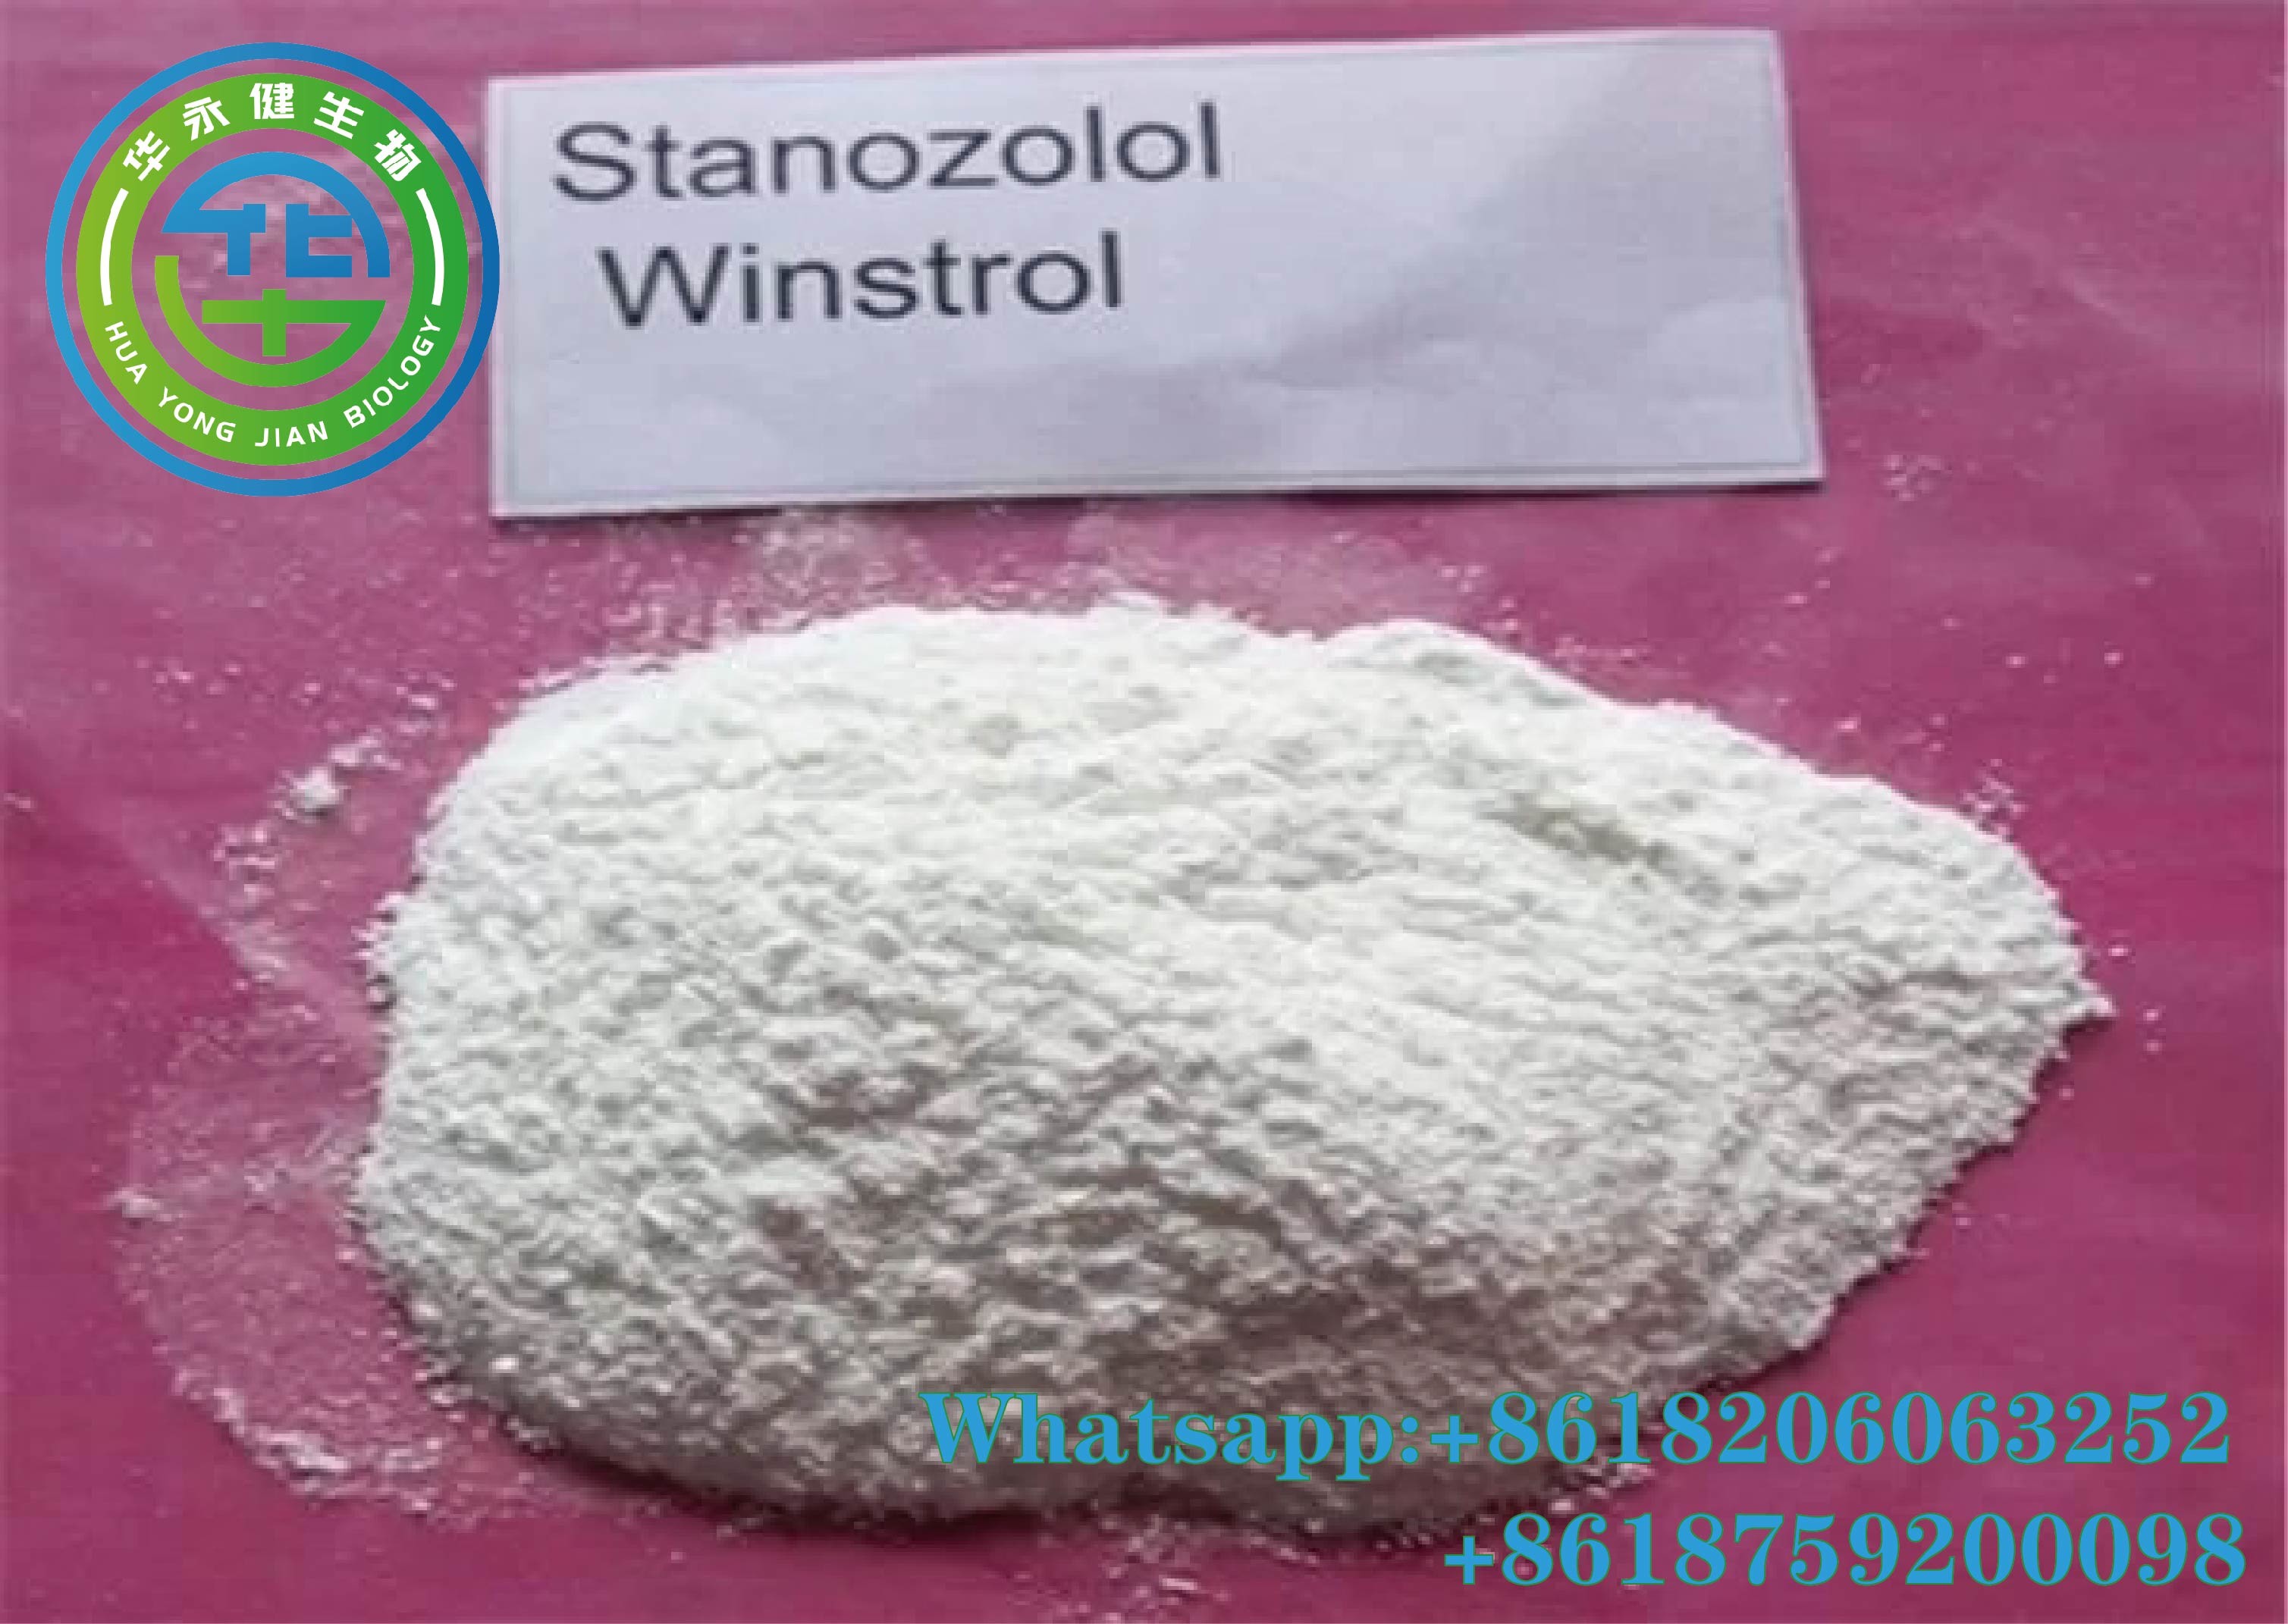 Wholesale Stanozolol / Winstrol Micronized Raw Steroid Powder for Bodybuilding CAS: 10418-03-8 from china suppliers